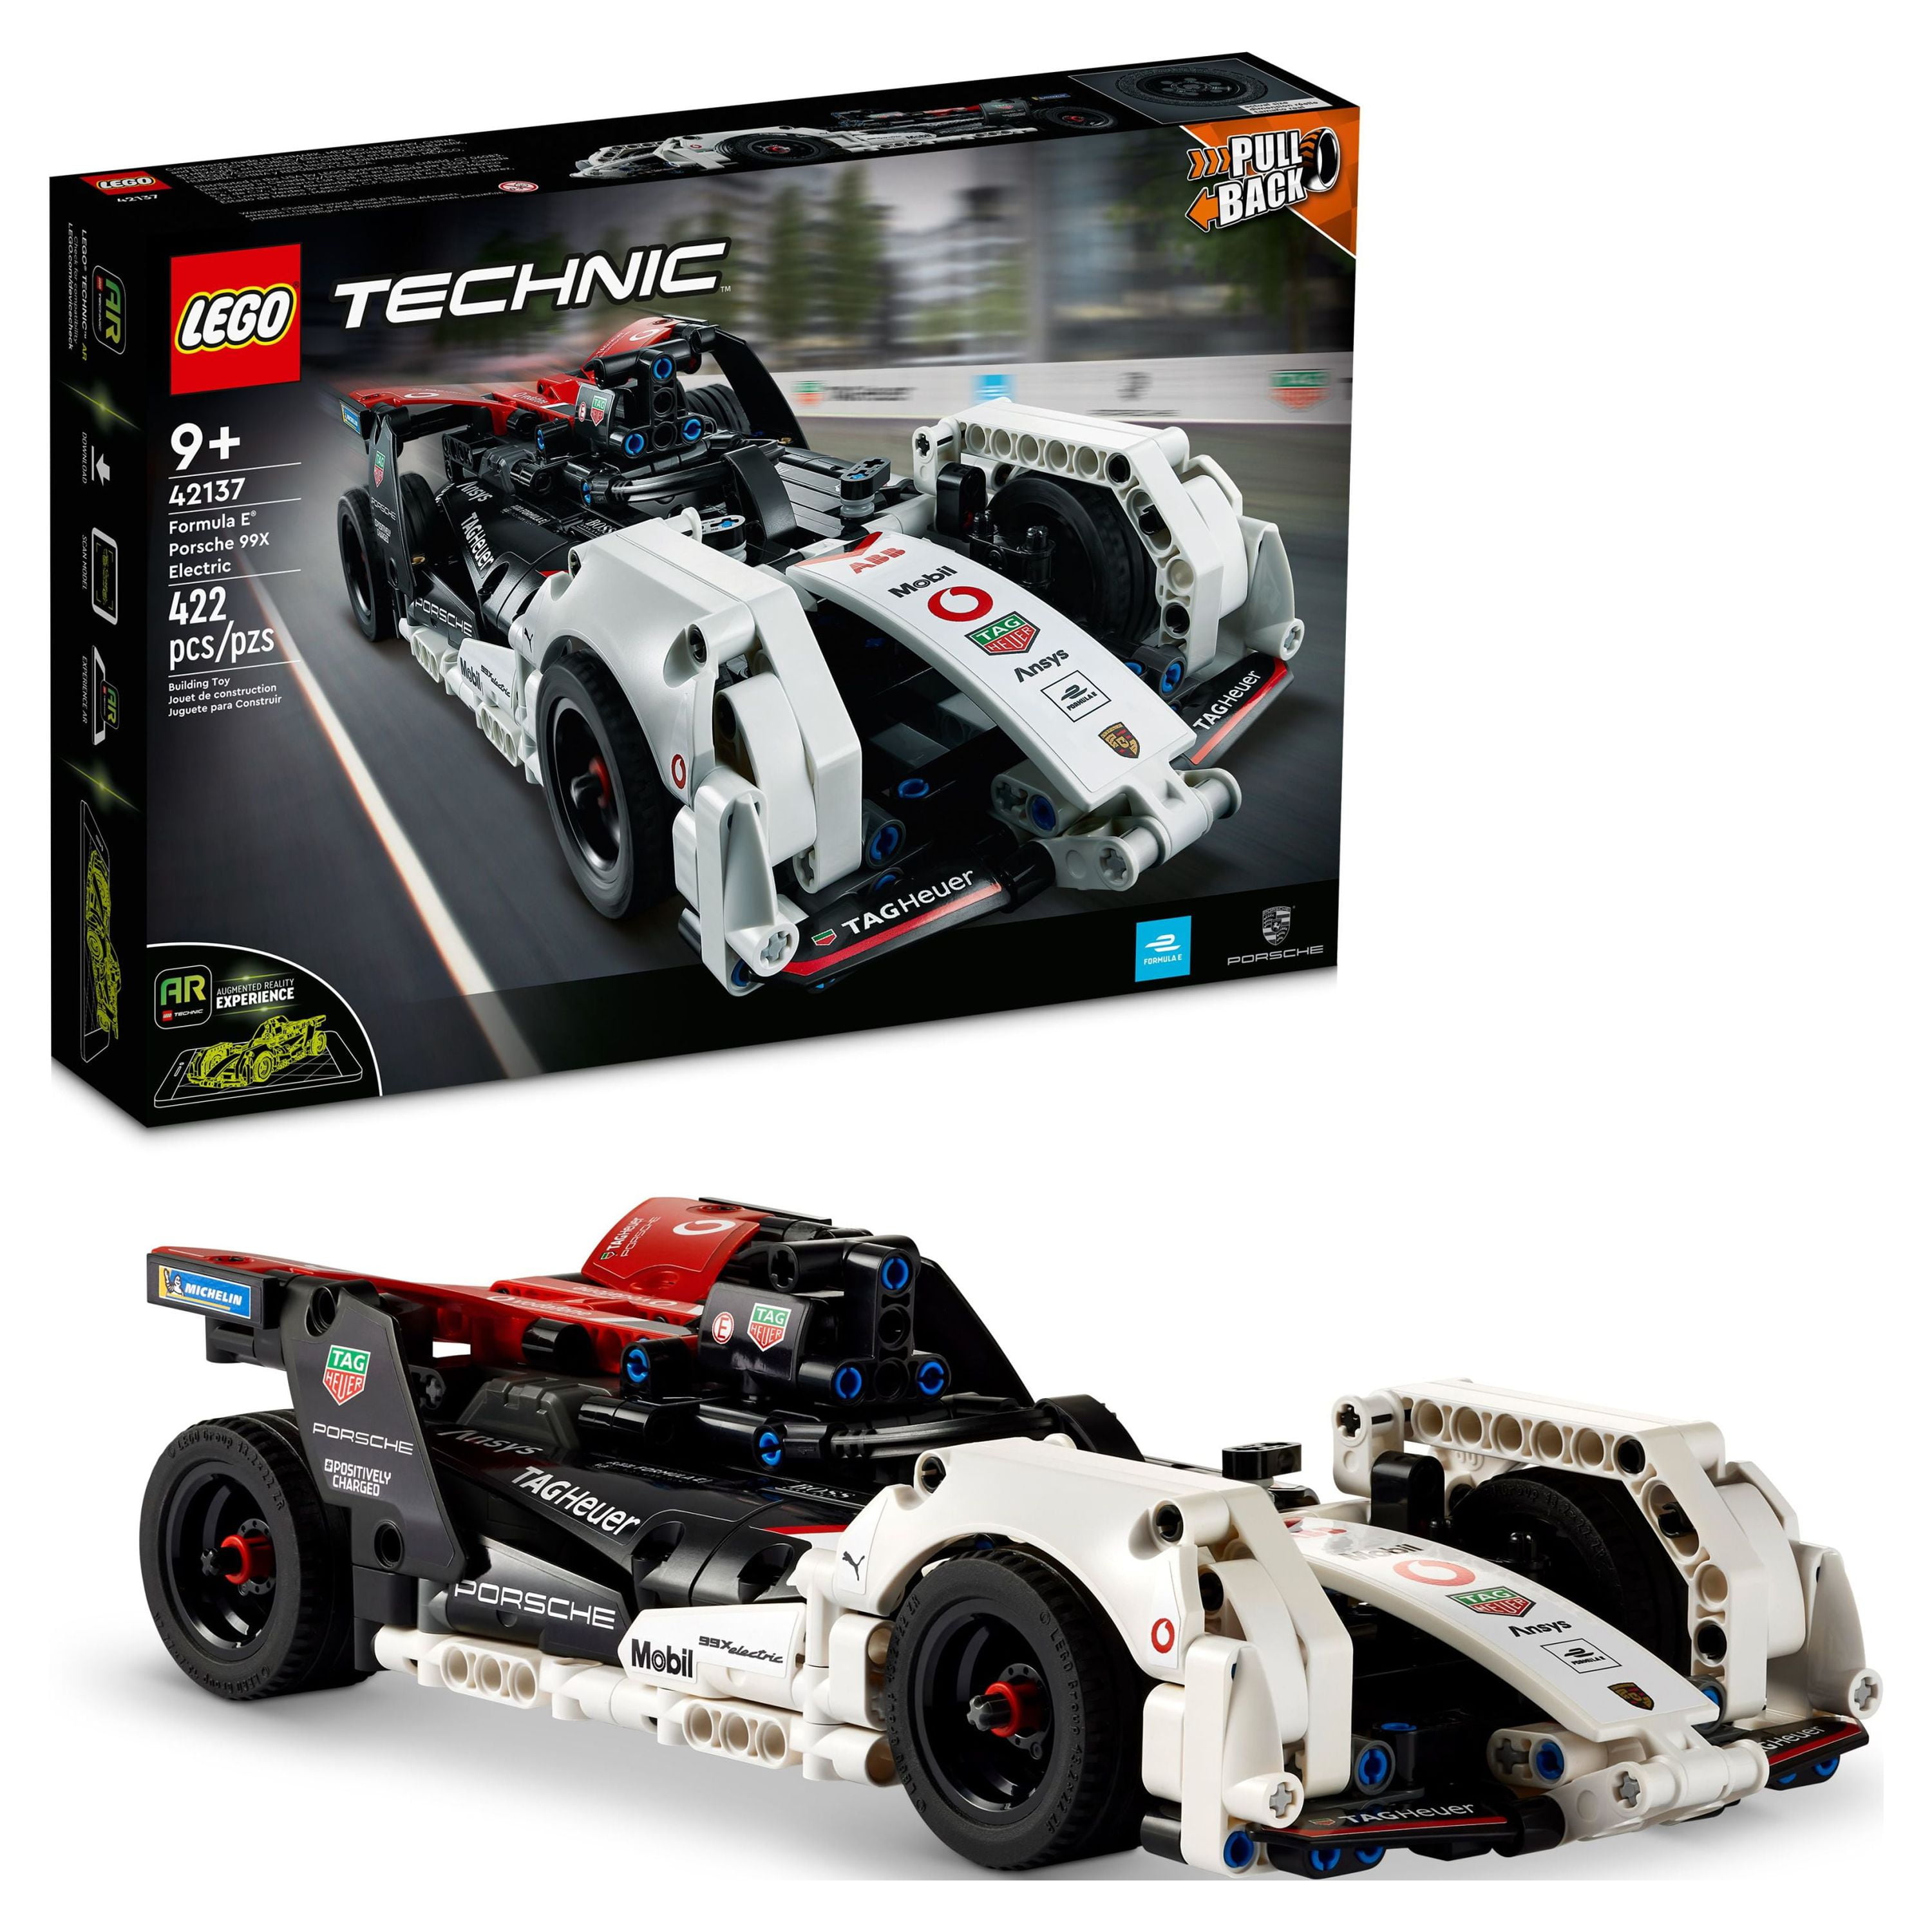 LEGO Technic Formula E Porsche 99X Electric 42137, Pull Back Toy Racing Car Model Building Kit with Immersive AR App Play, Gifts for Kids, Boys & Girls - image 1 of 9